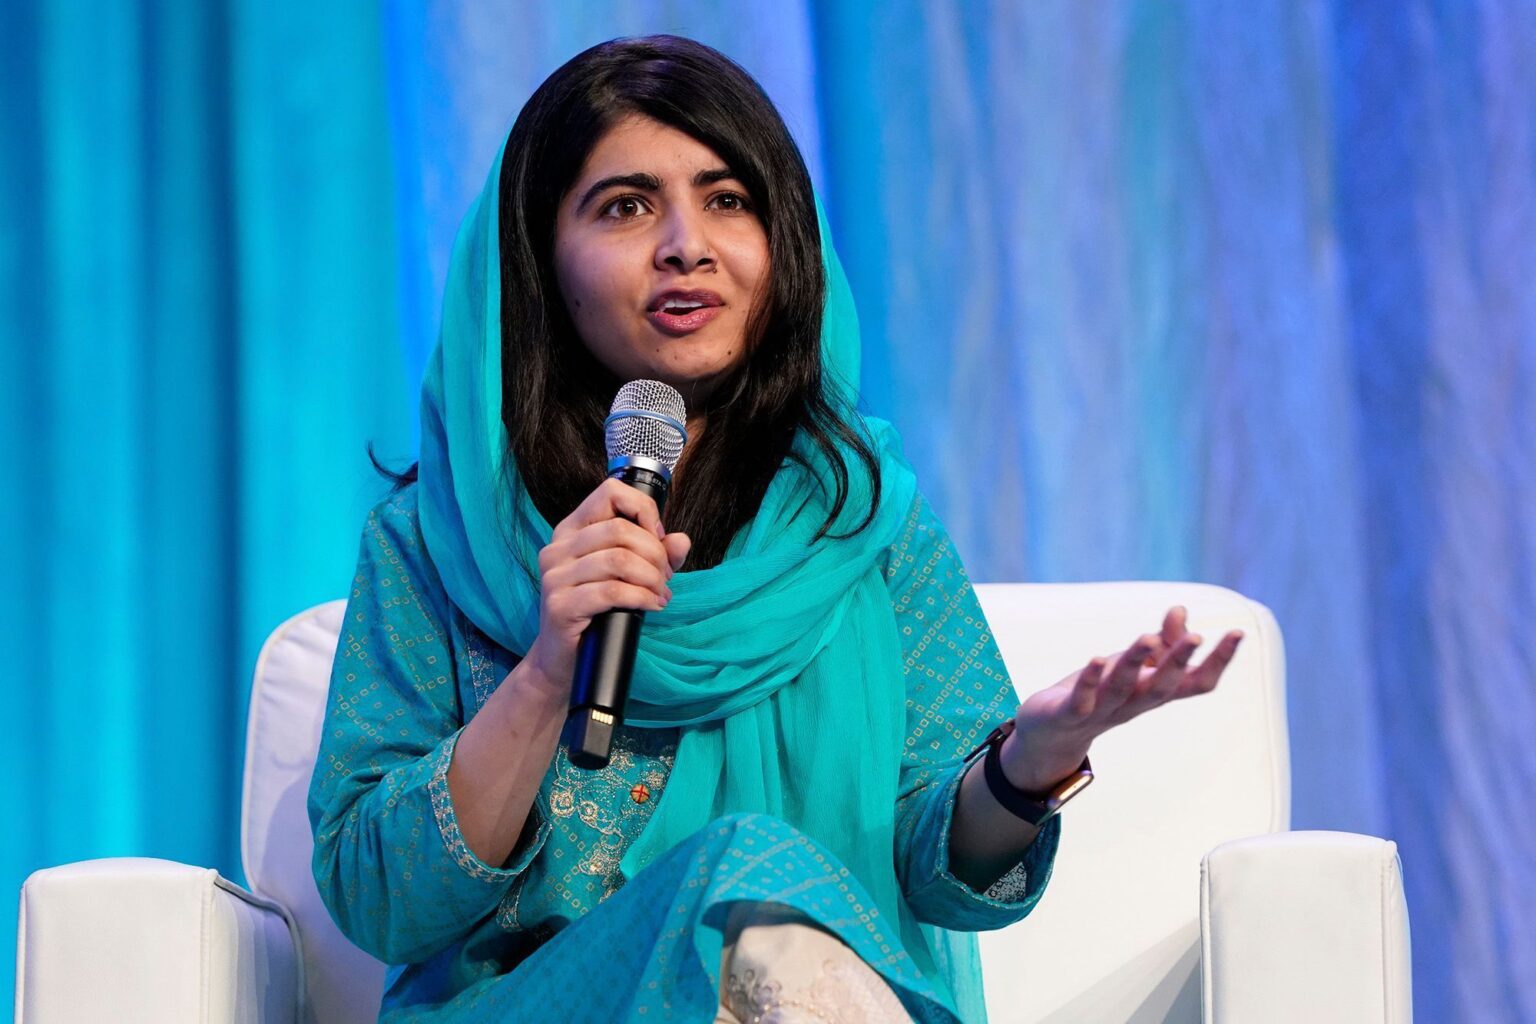 Pakistani activist Malala Yousafzai recently announced she’s teaming up with Apple TV Plus. Here’s everything we know so far about the partnership.